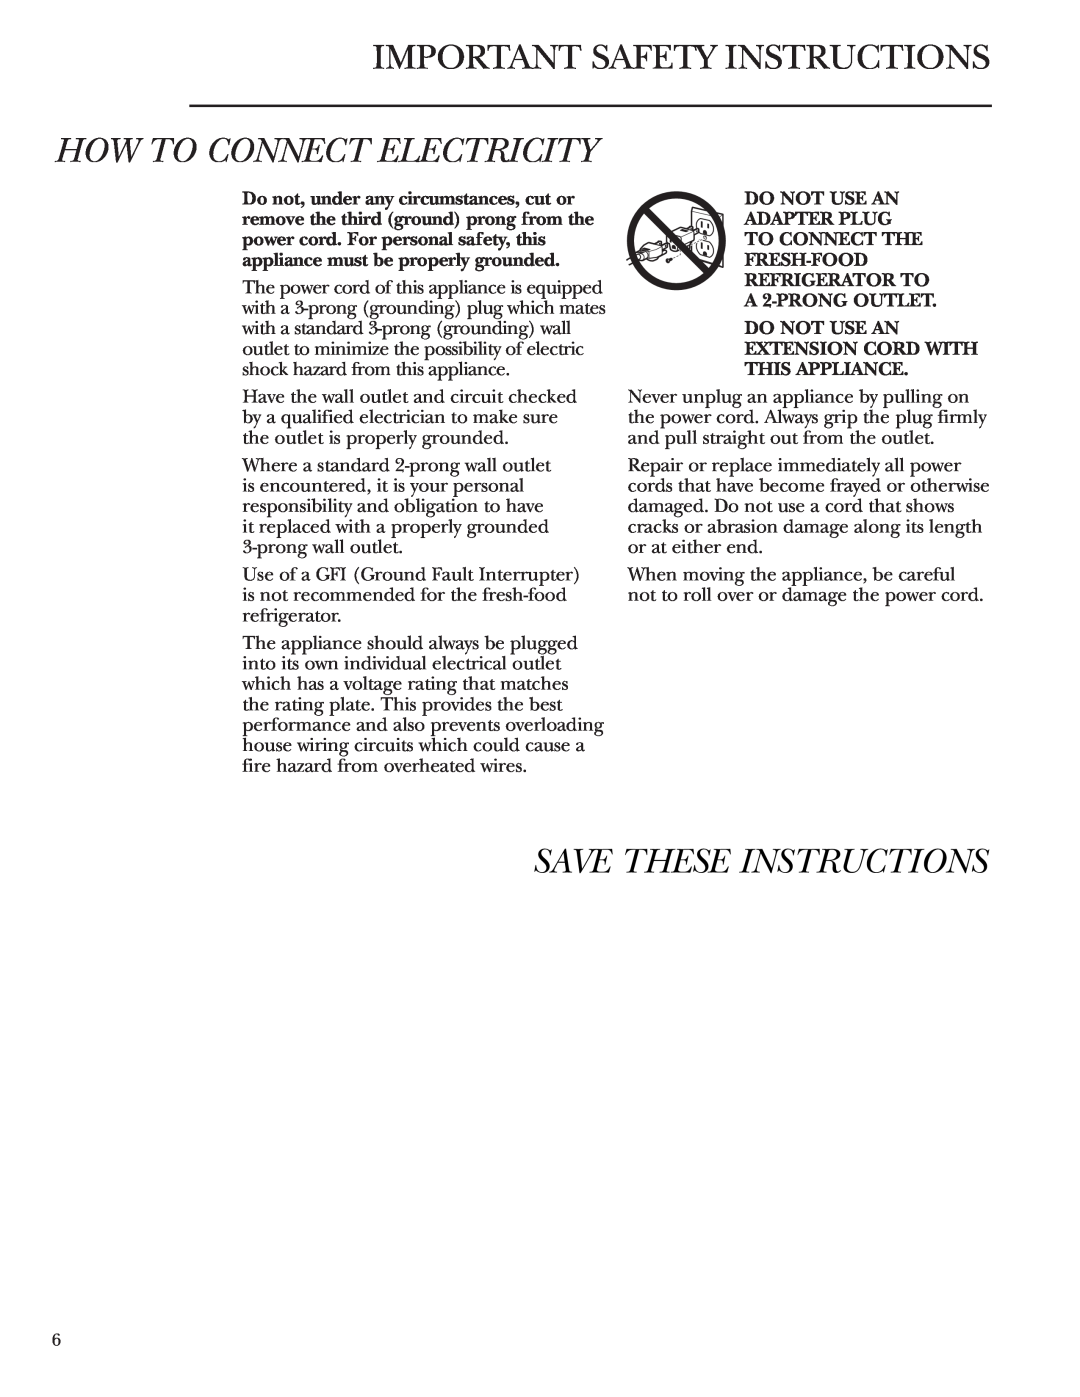 GE ZIFI240, ZIFS240 owner manual How To Connect Electricity, Save These Instructions, Important Safety Instructions 